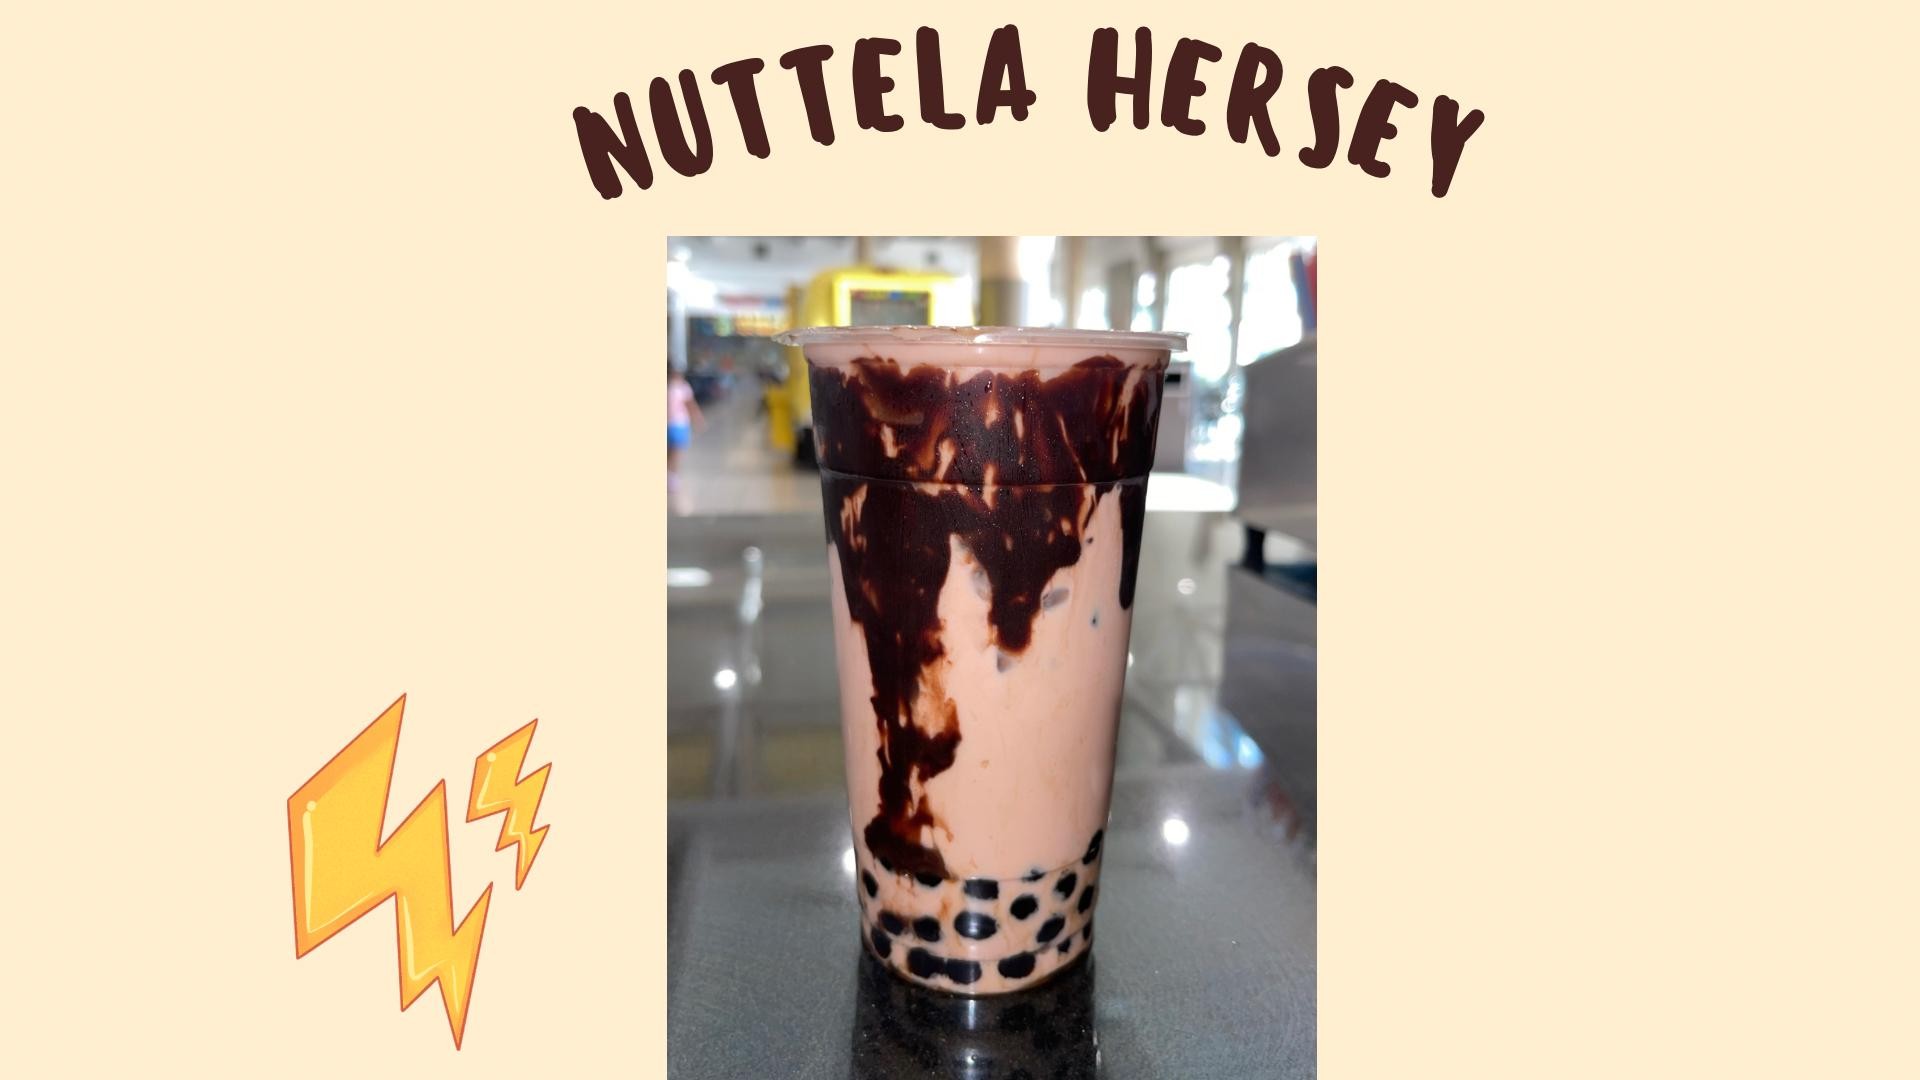 Nutella and Hershey